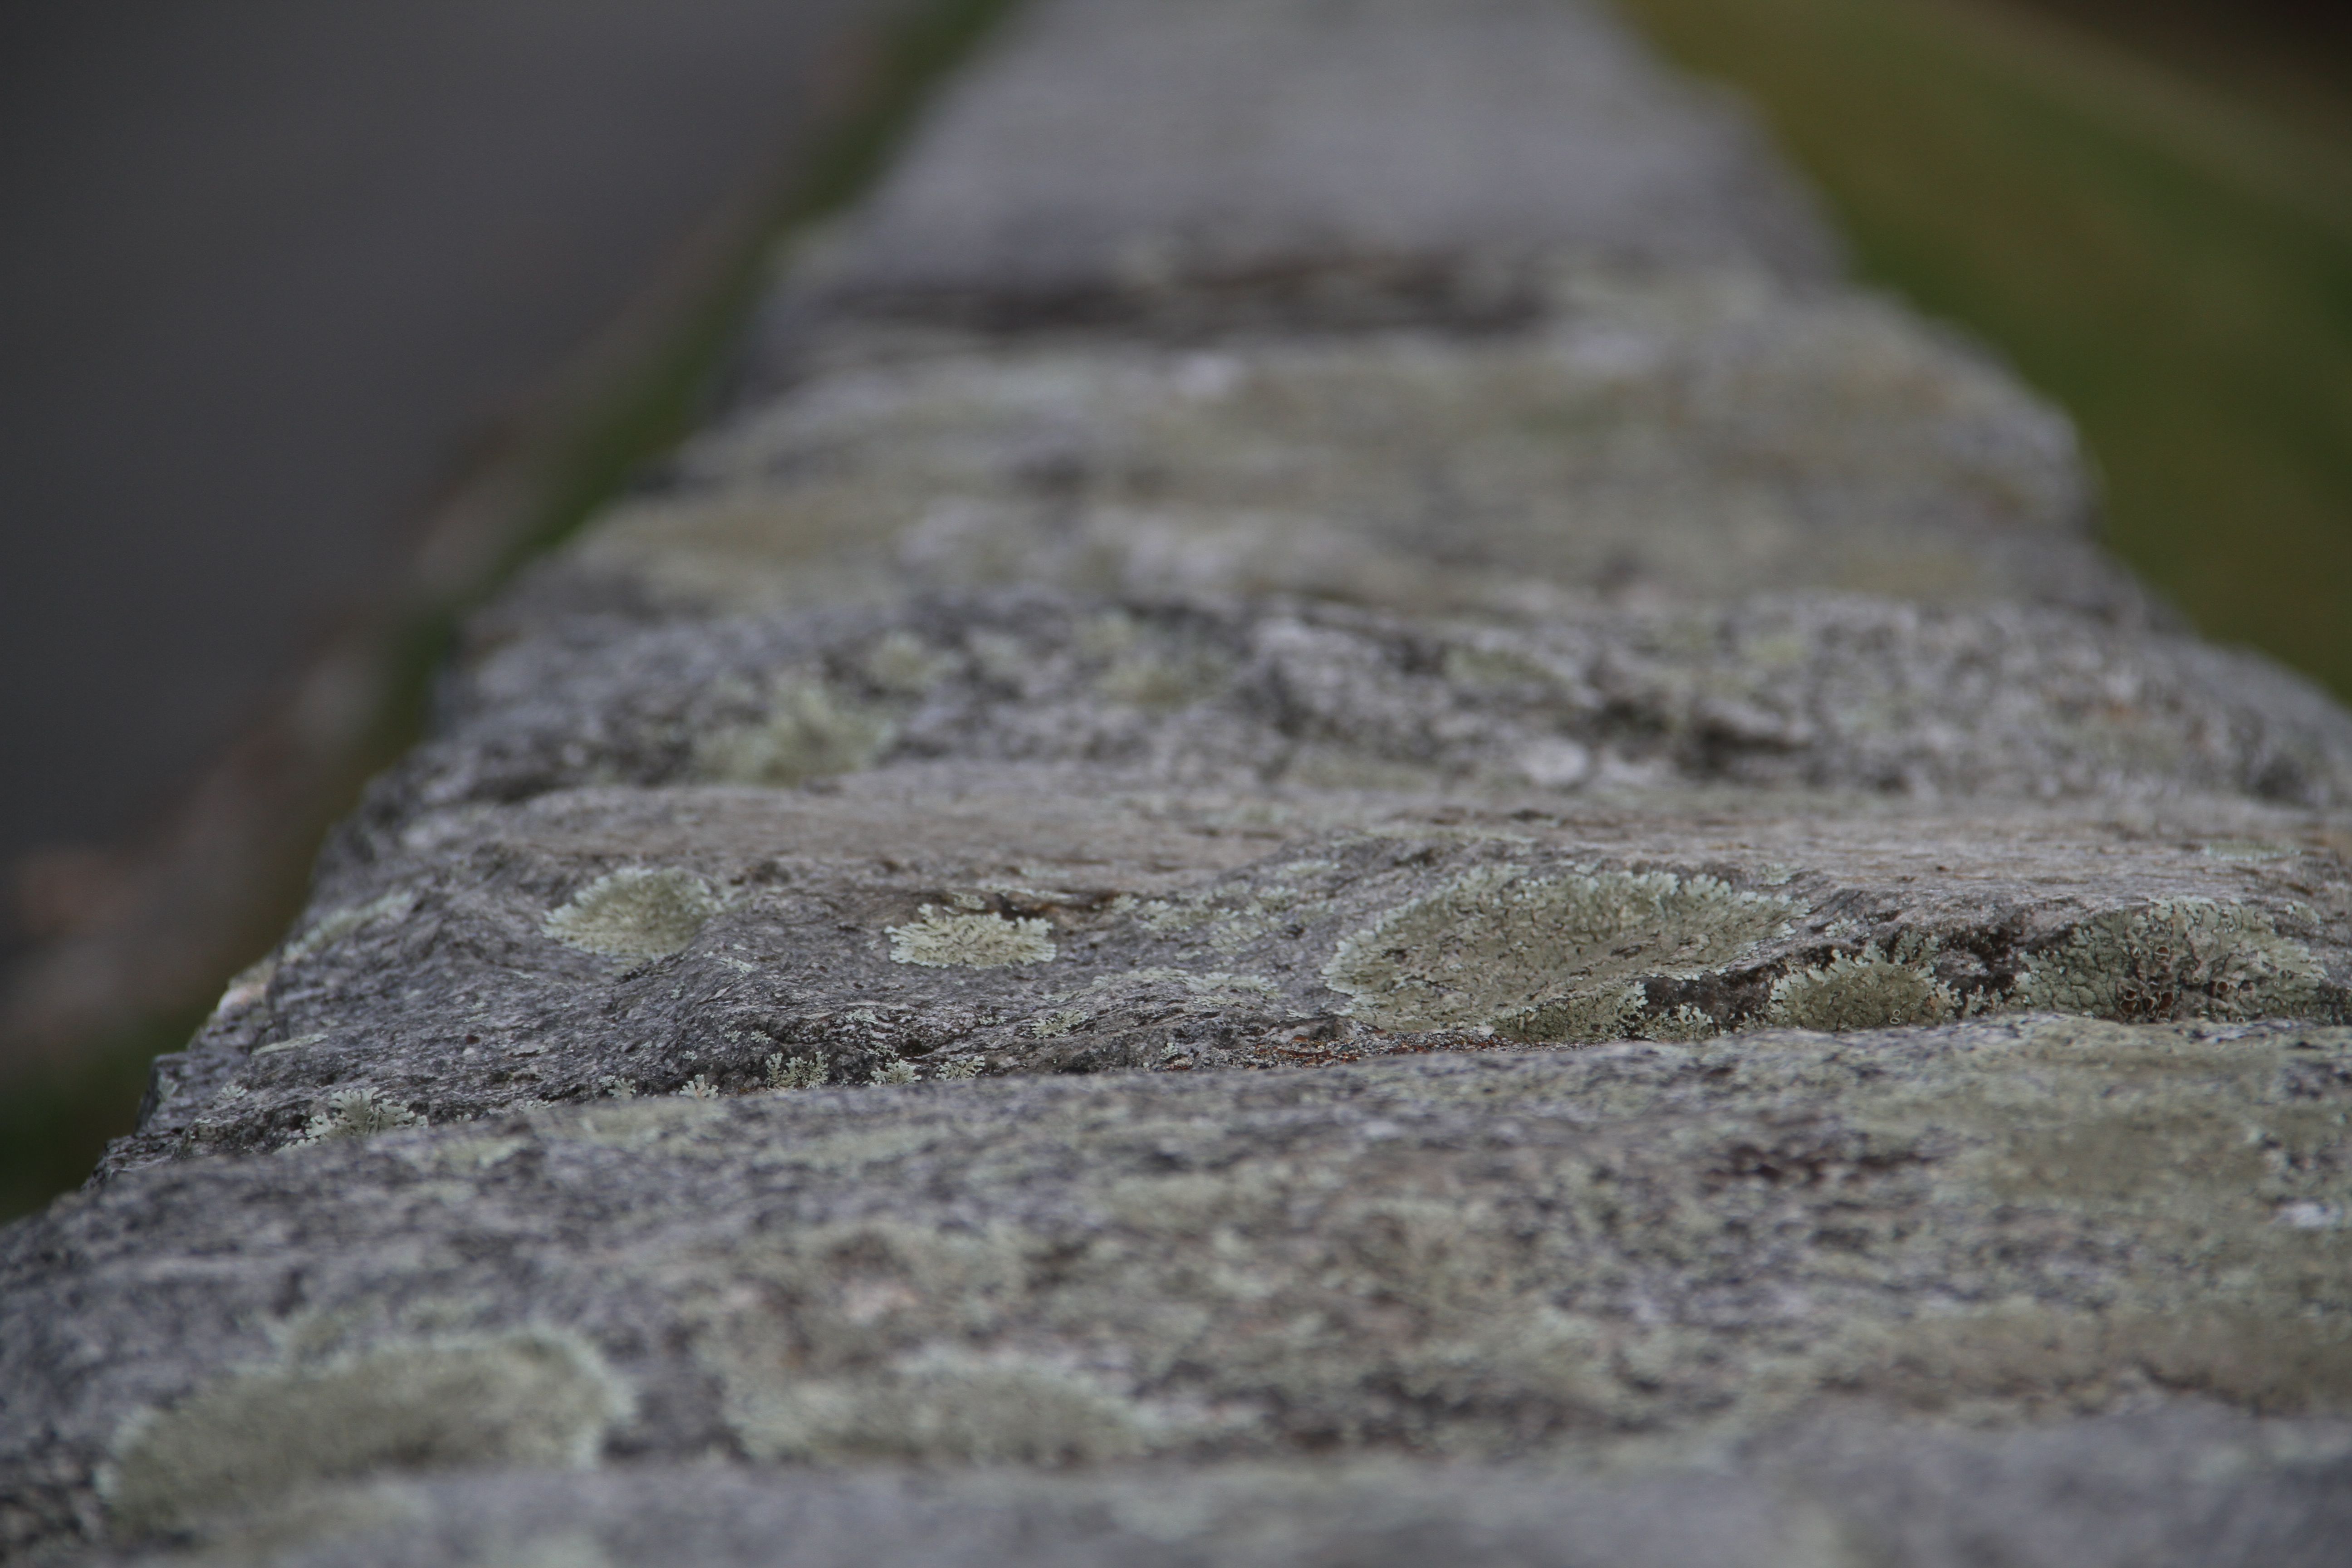 Lichen on the stone top of the retaining wall-roadway-damn.